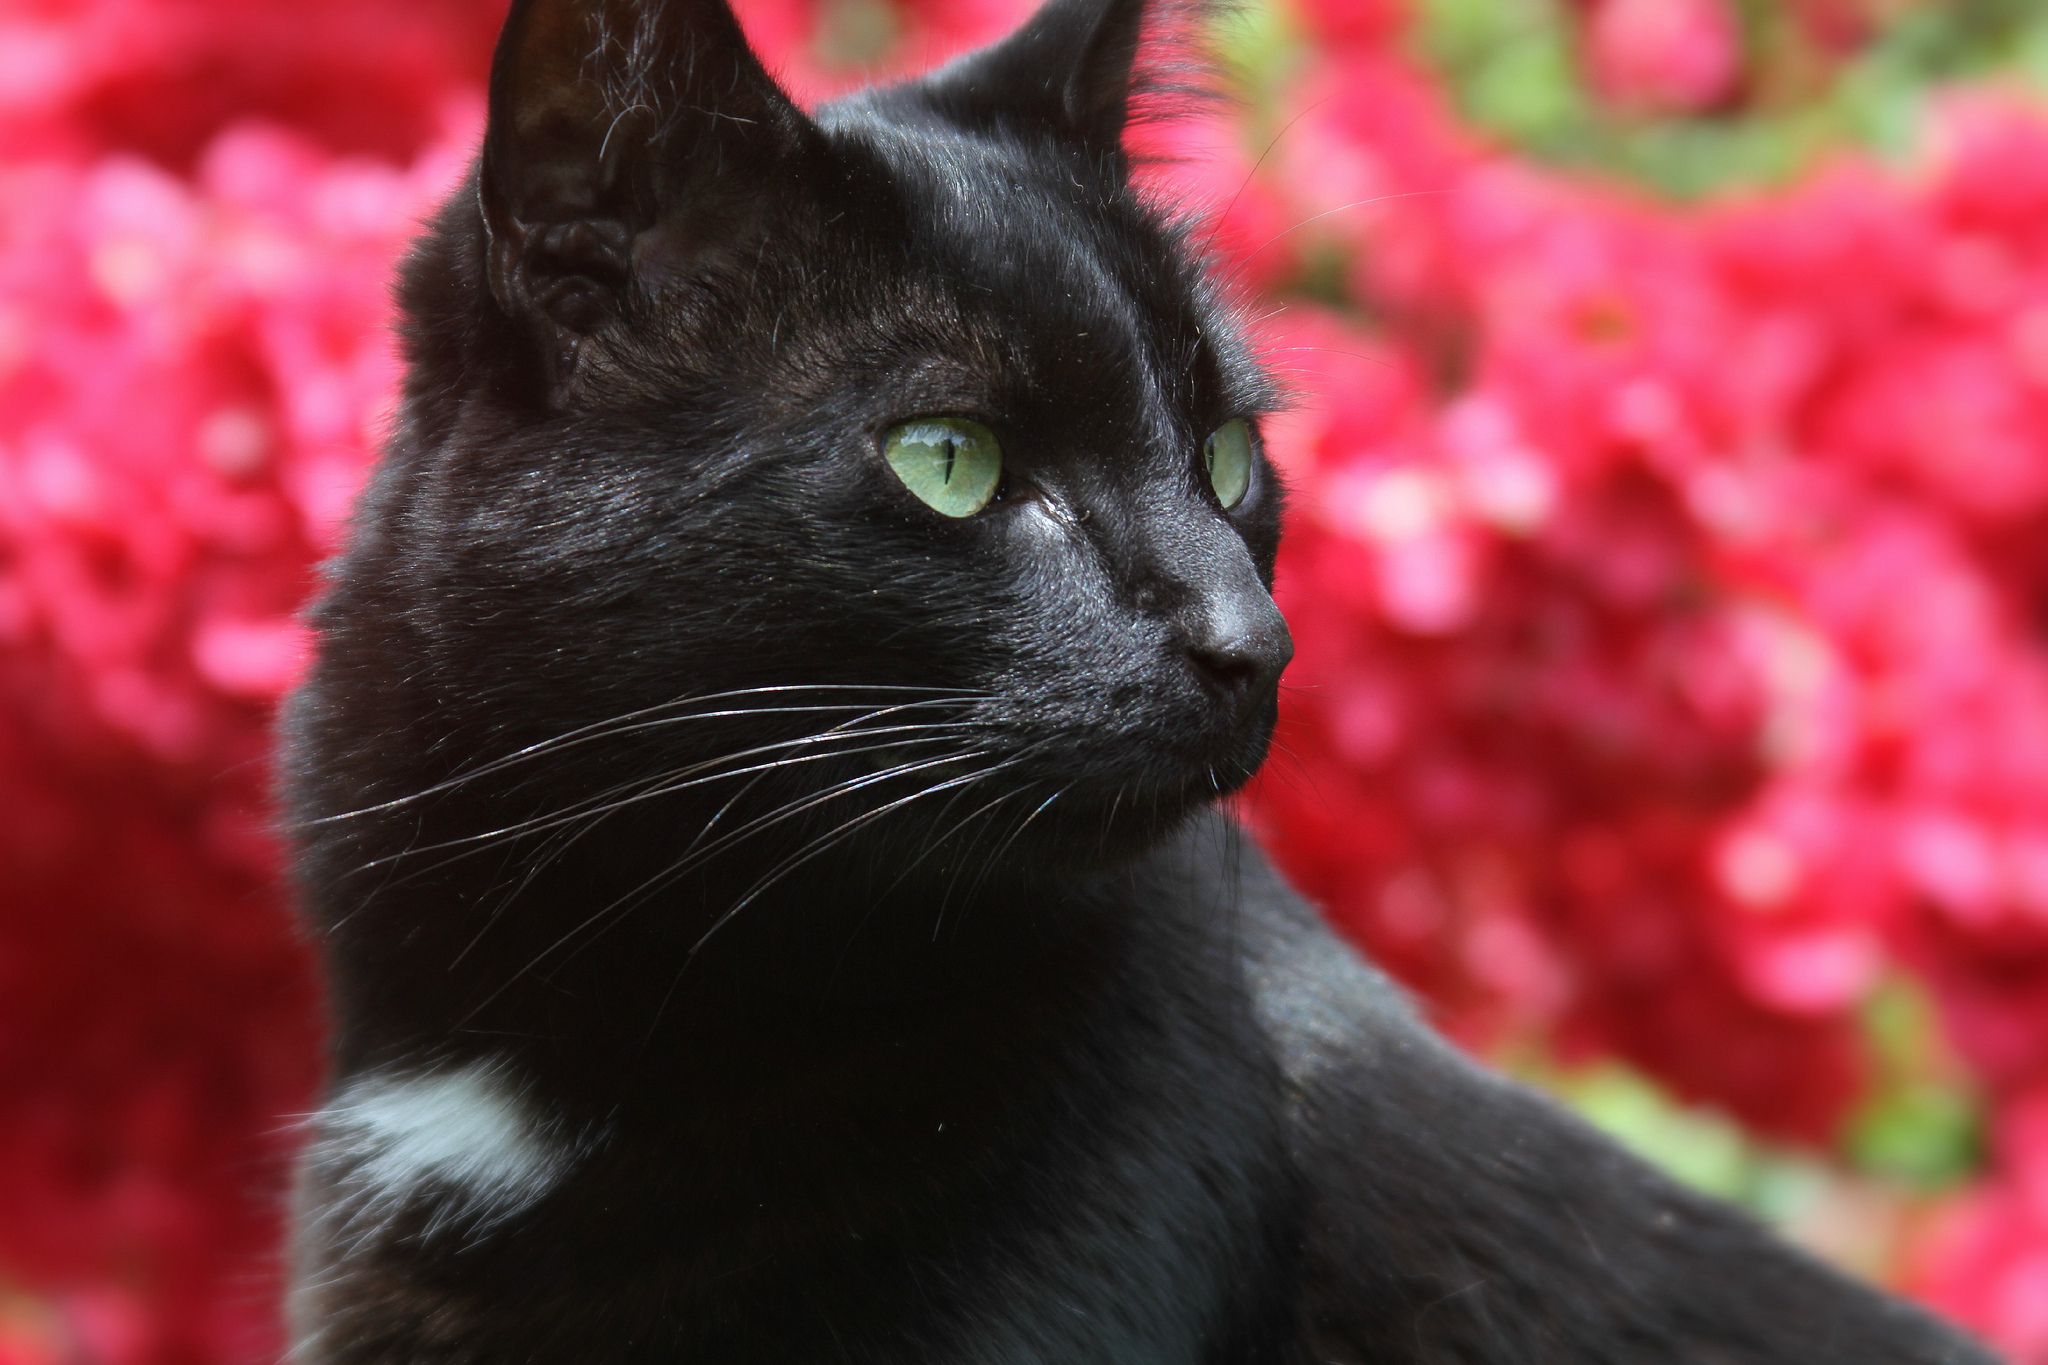 Black cat on a background of pink flowers wallpapers and images 2048x1365